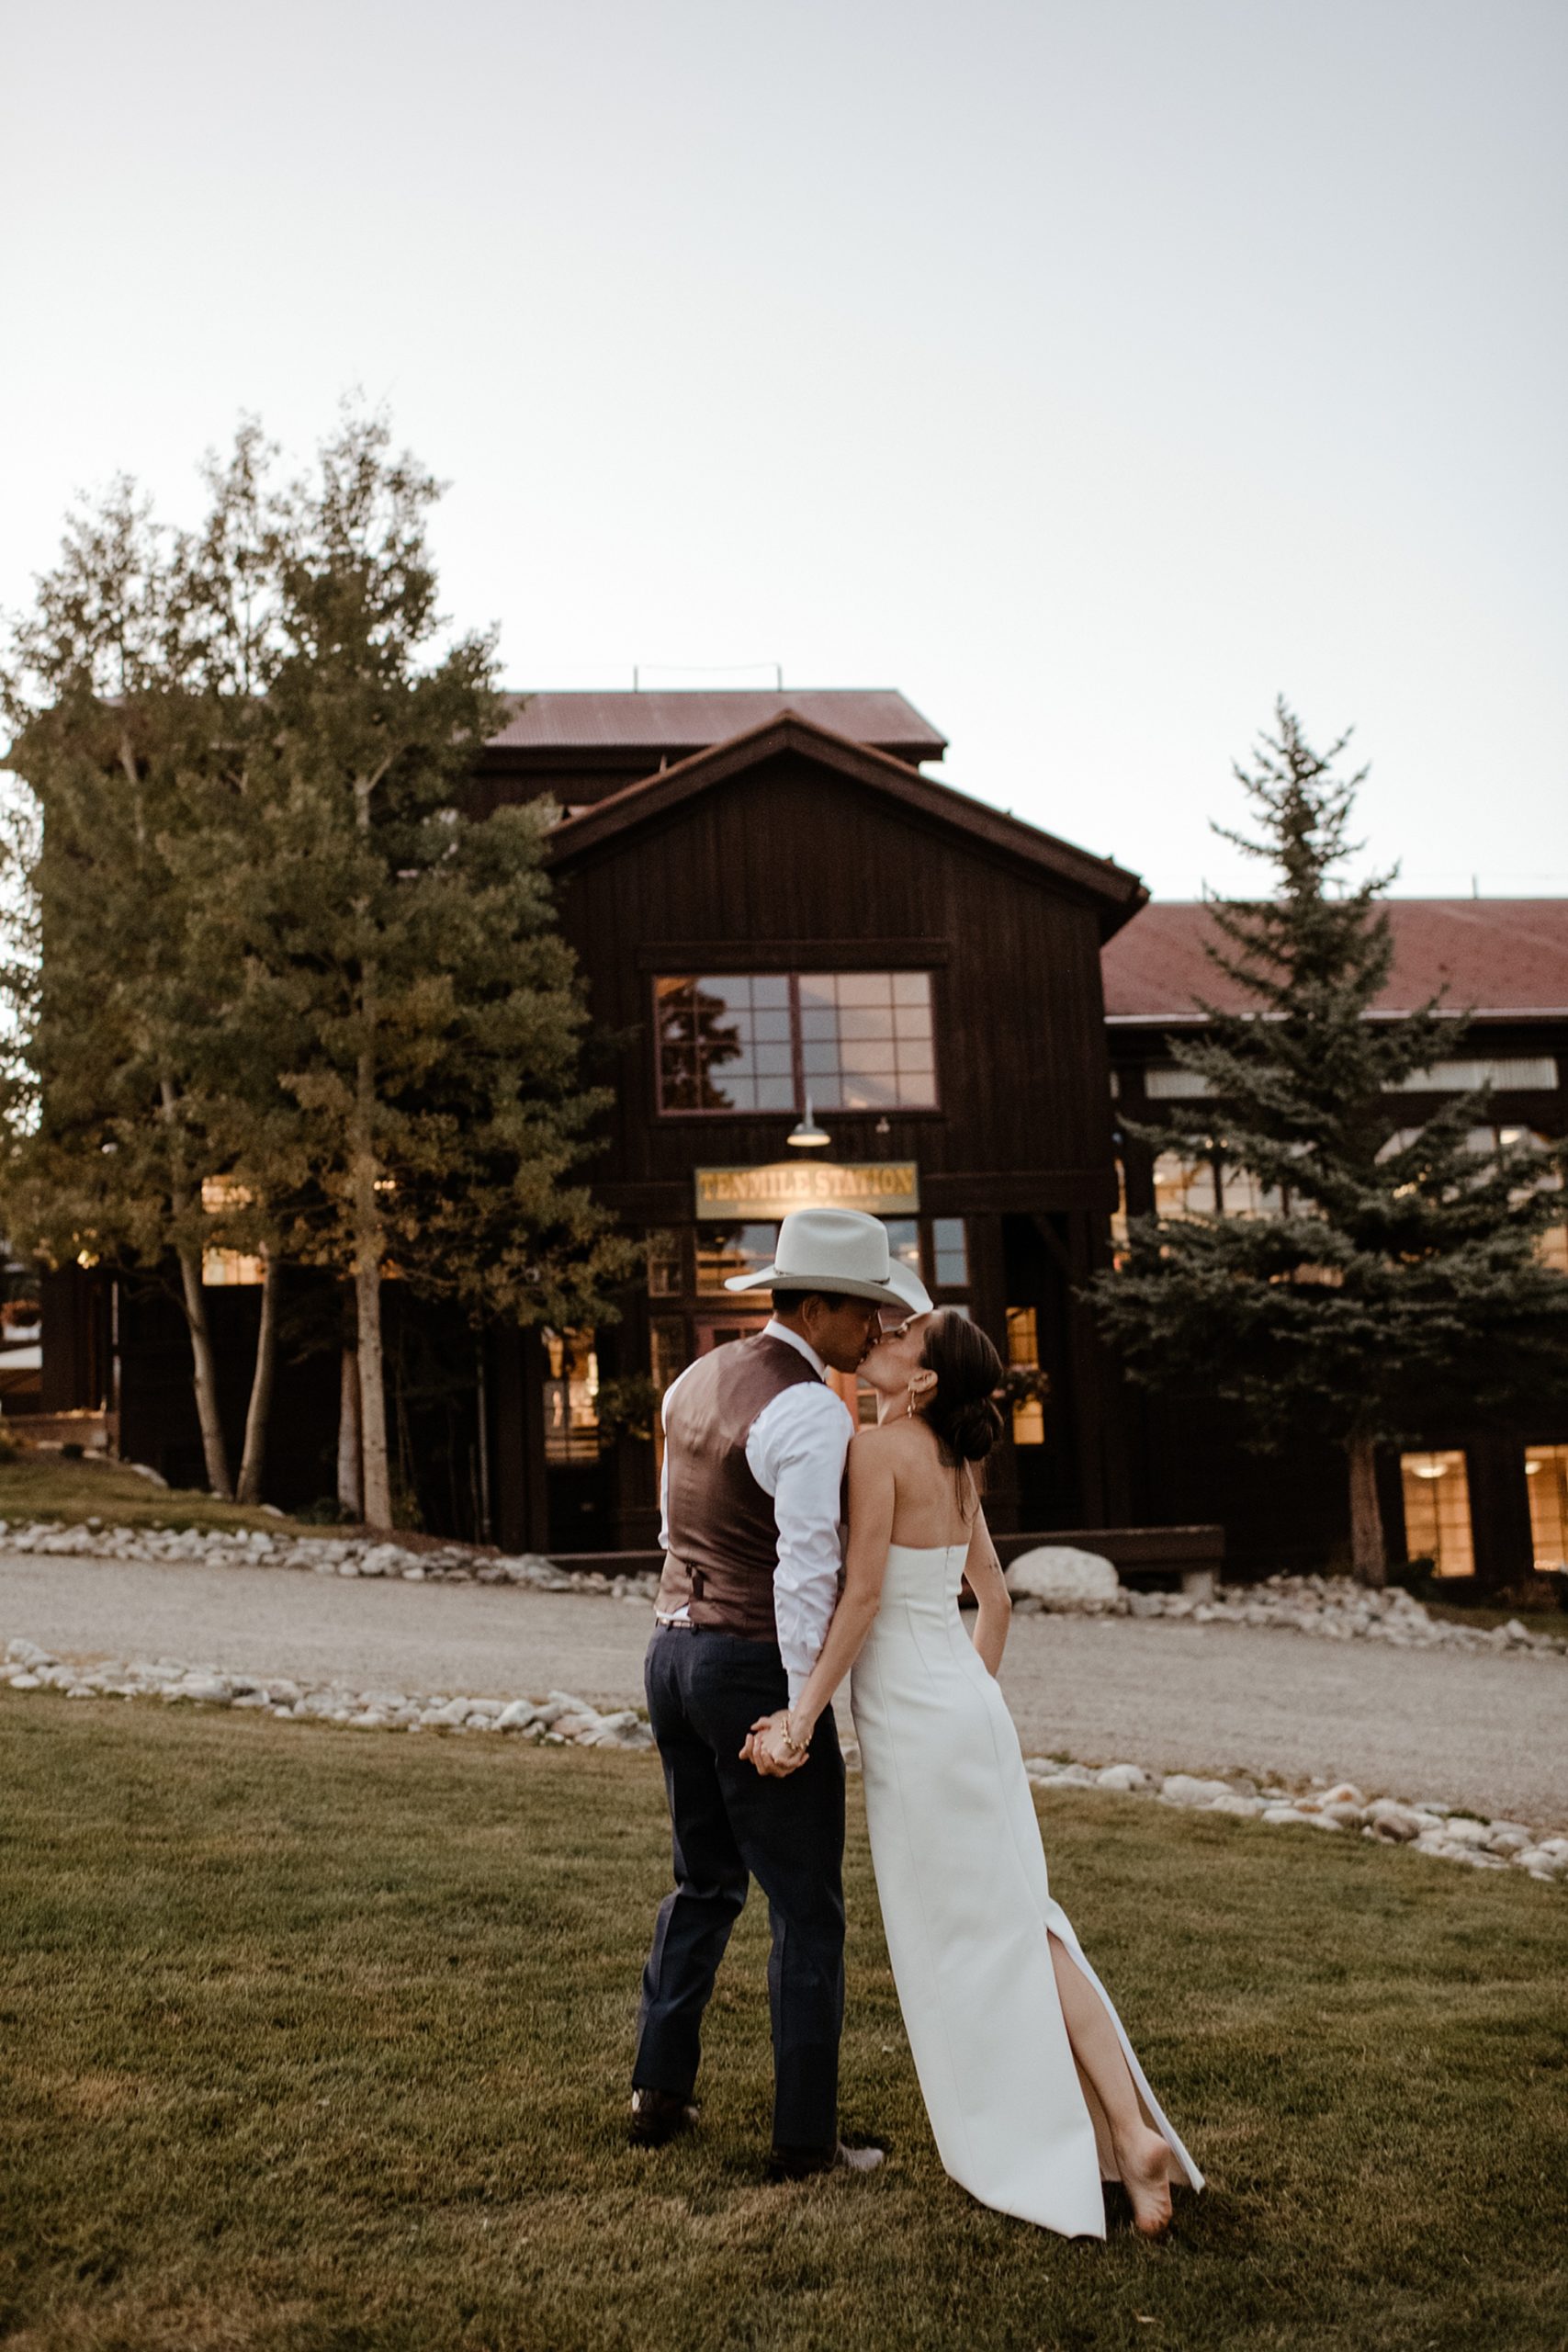 A bride and groom in front of Ten Mile Station wedding venue